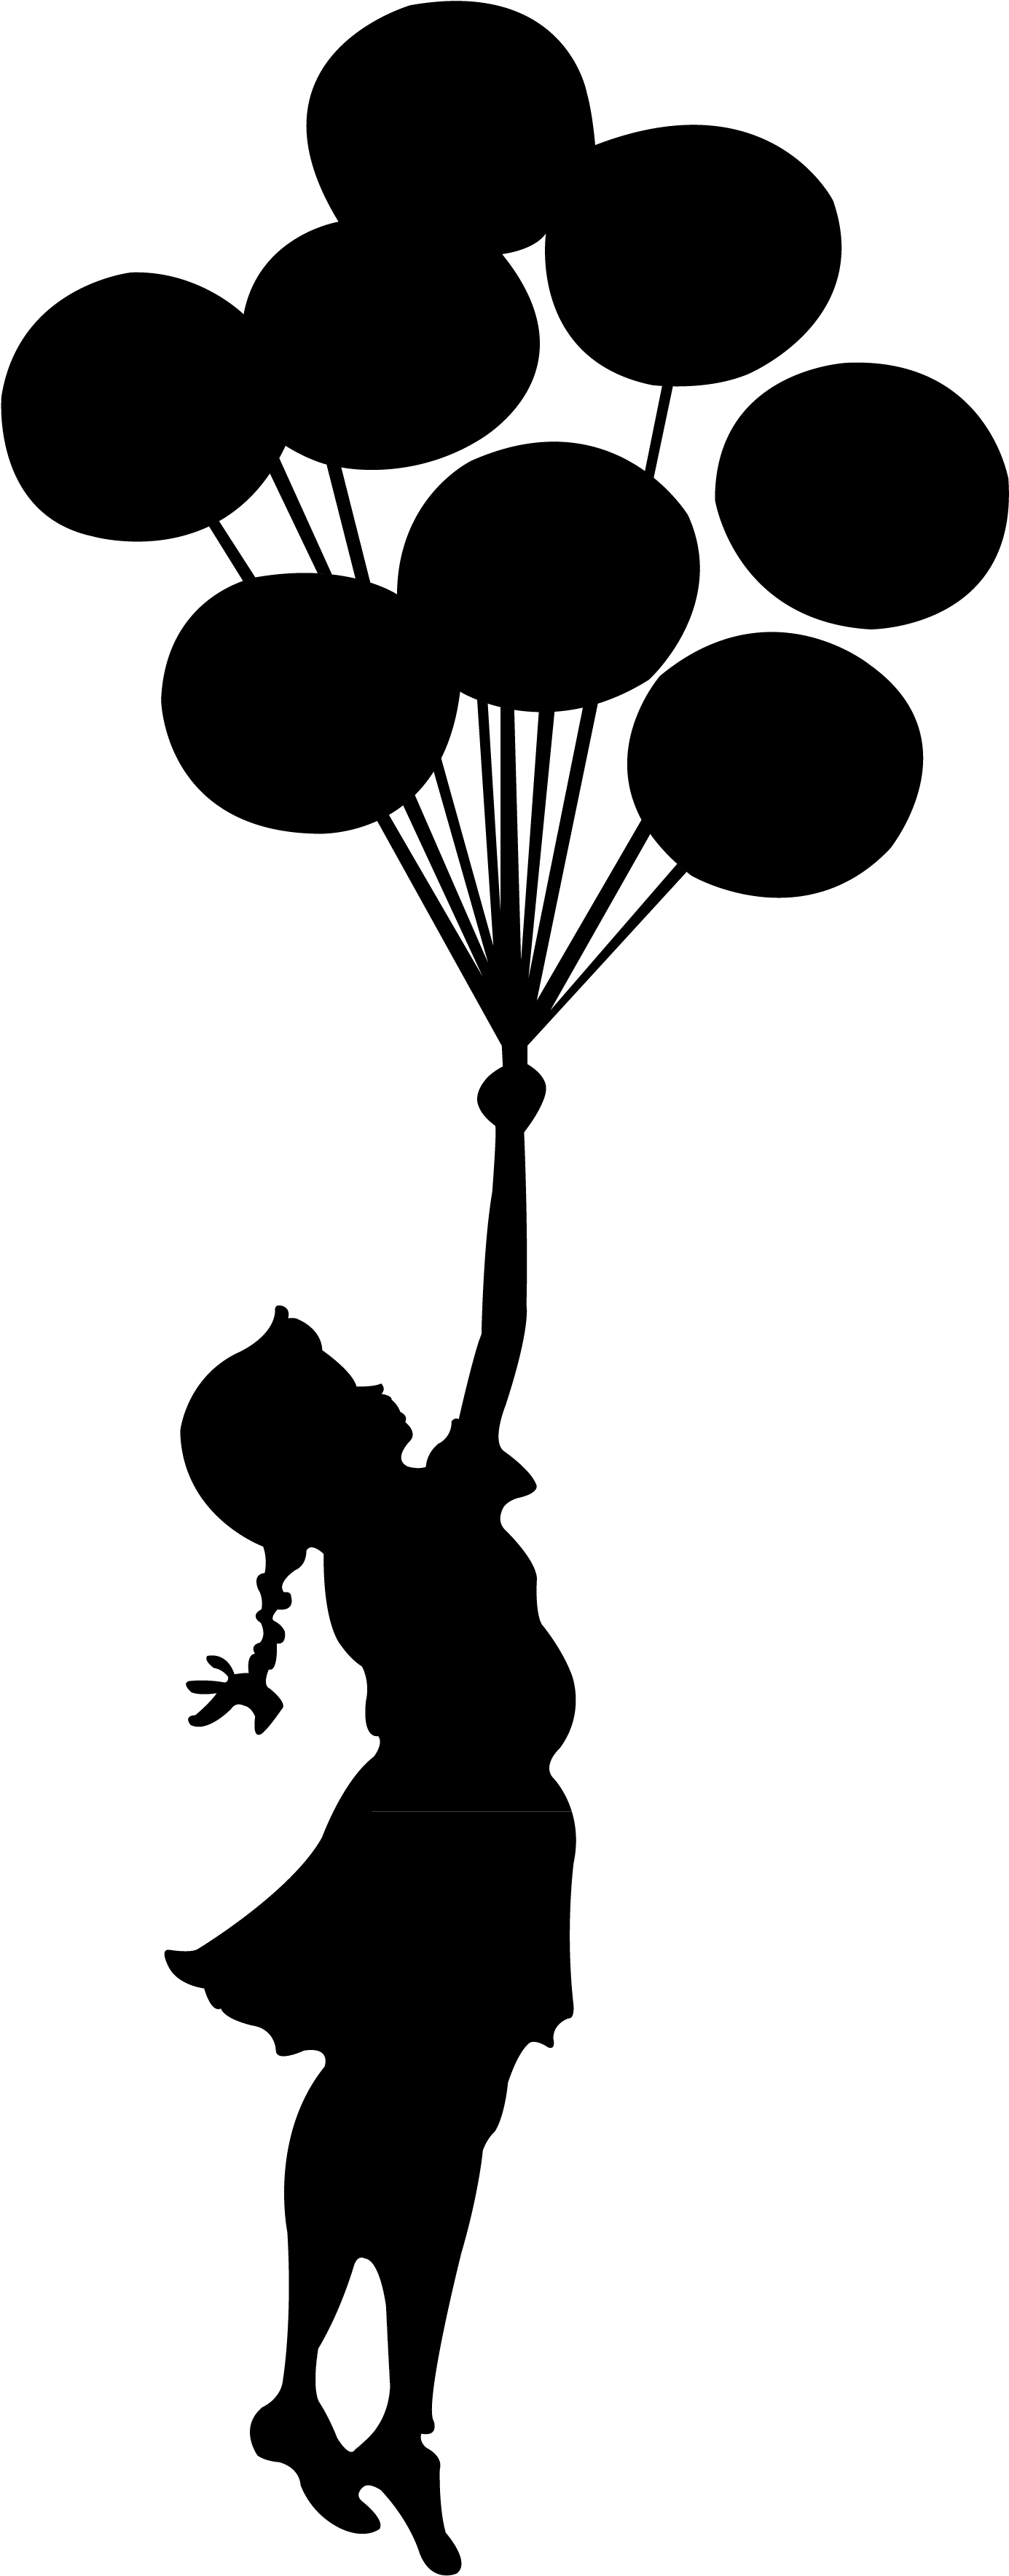 Girl Dancing With Umbrella Silhouette - Banksy Floating Balloon Girl Wall Stickers (2952x3702)